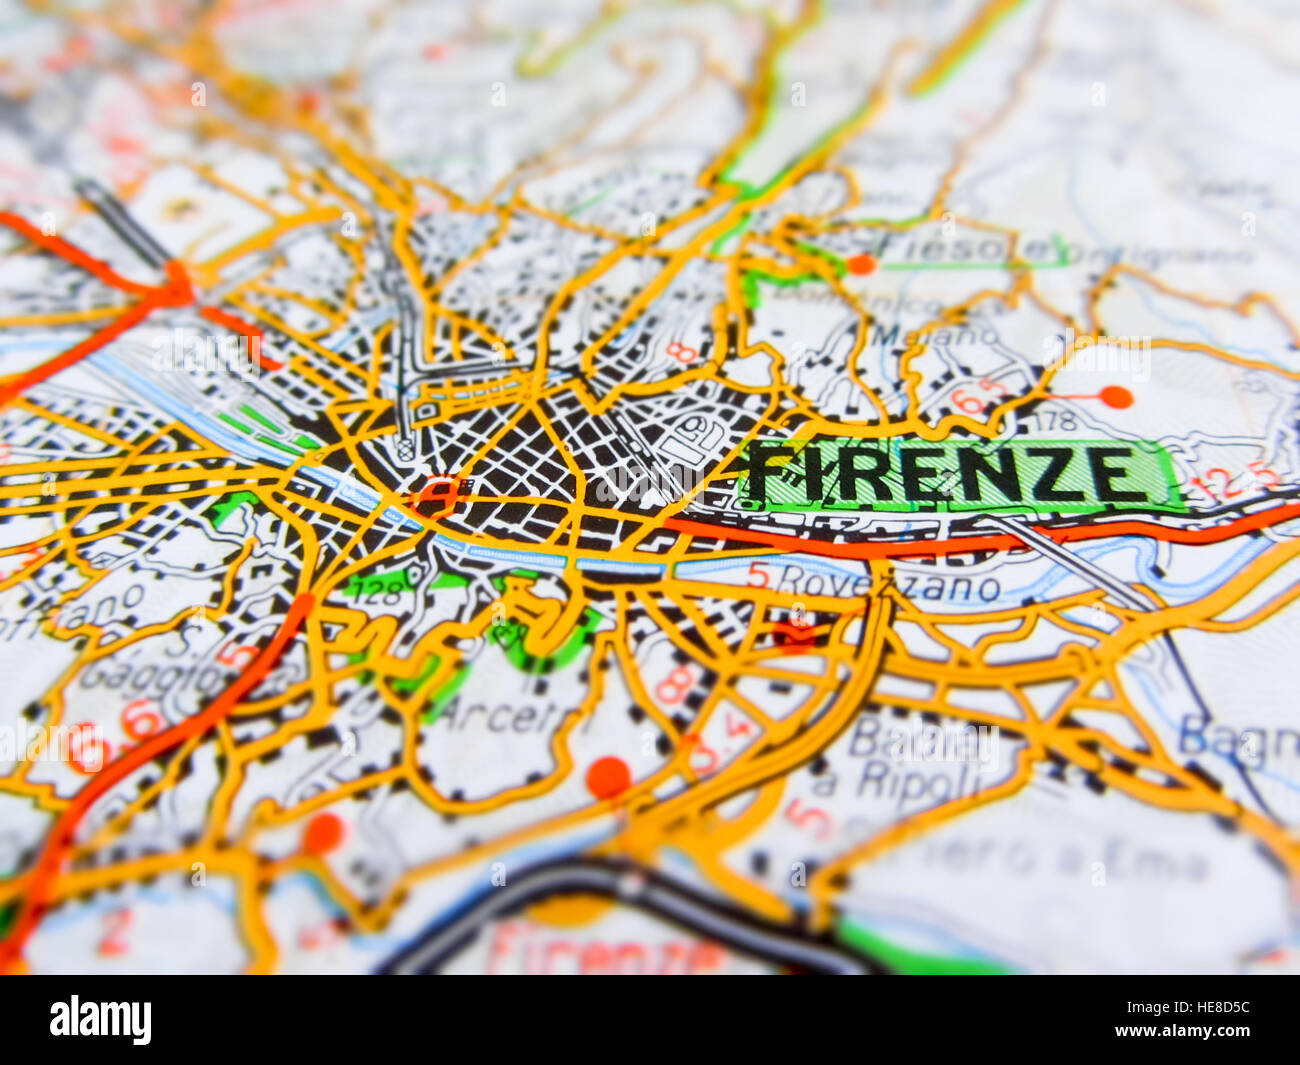 Firenze city over a road map (ITALY) Stock Photo